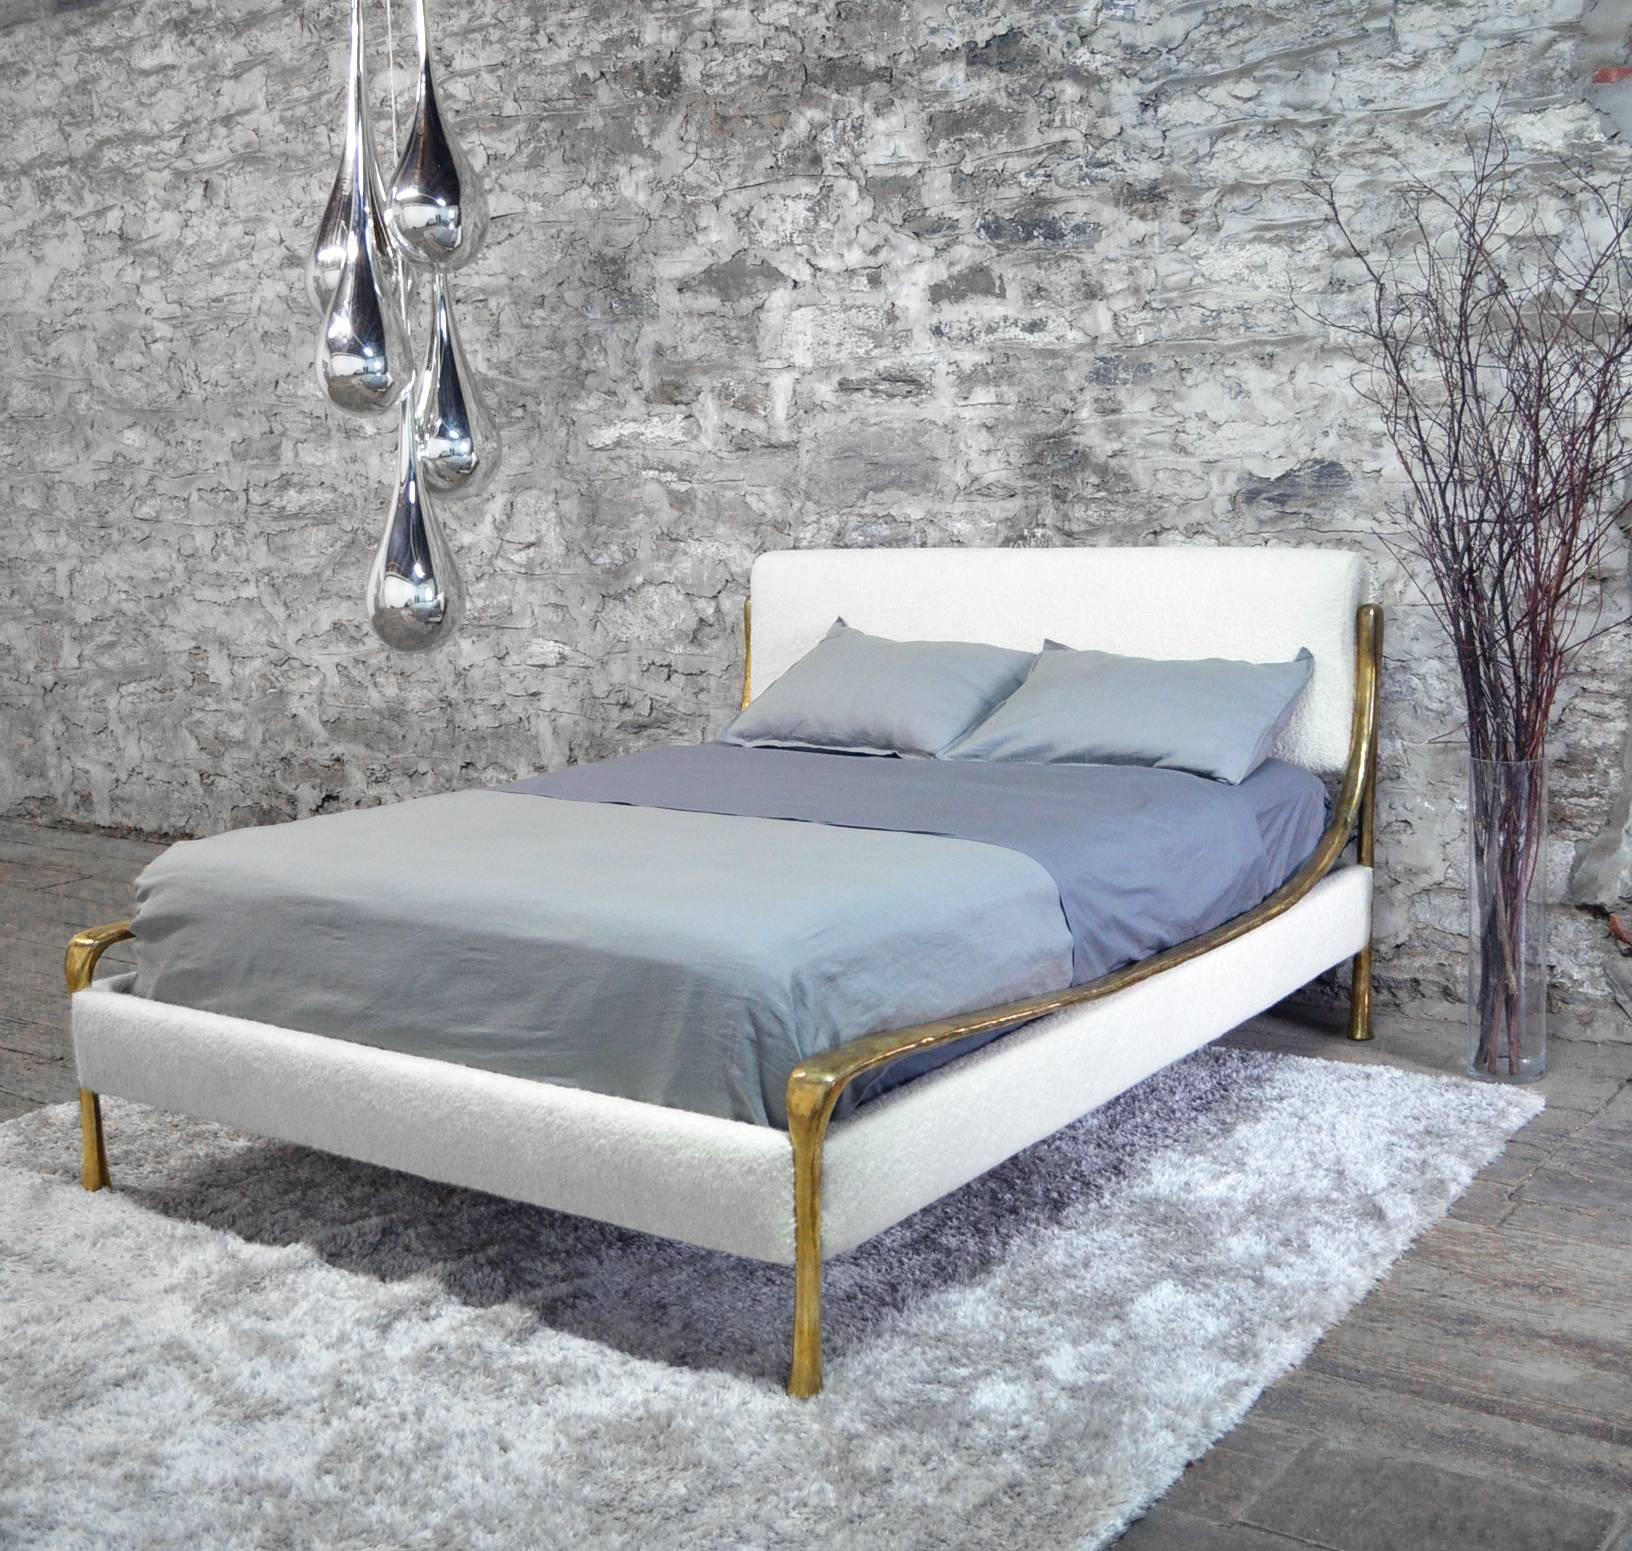 Hand-carved and cast silicone bronze frame with fabric or leather upholstered headboard and rails (COM/COL.) Frame finishes include bronze or white bronze. Each bed is customized to the specified mattress height.